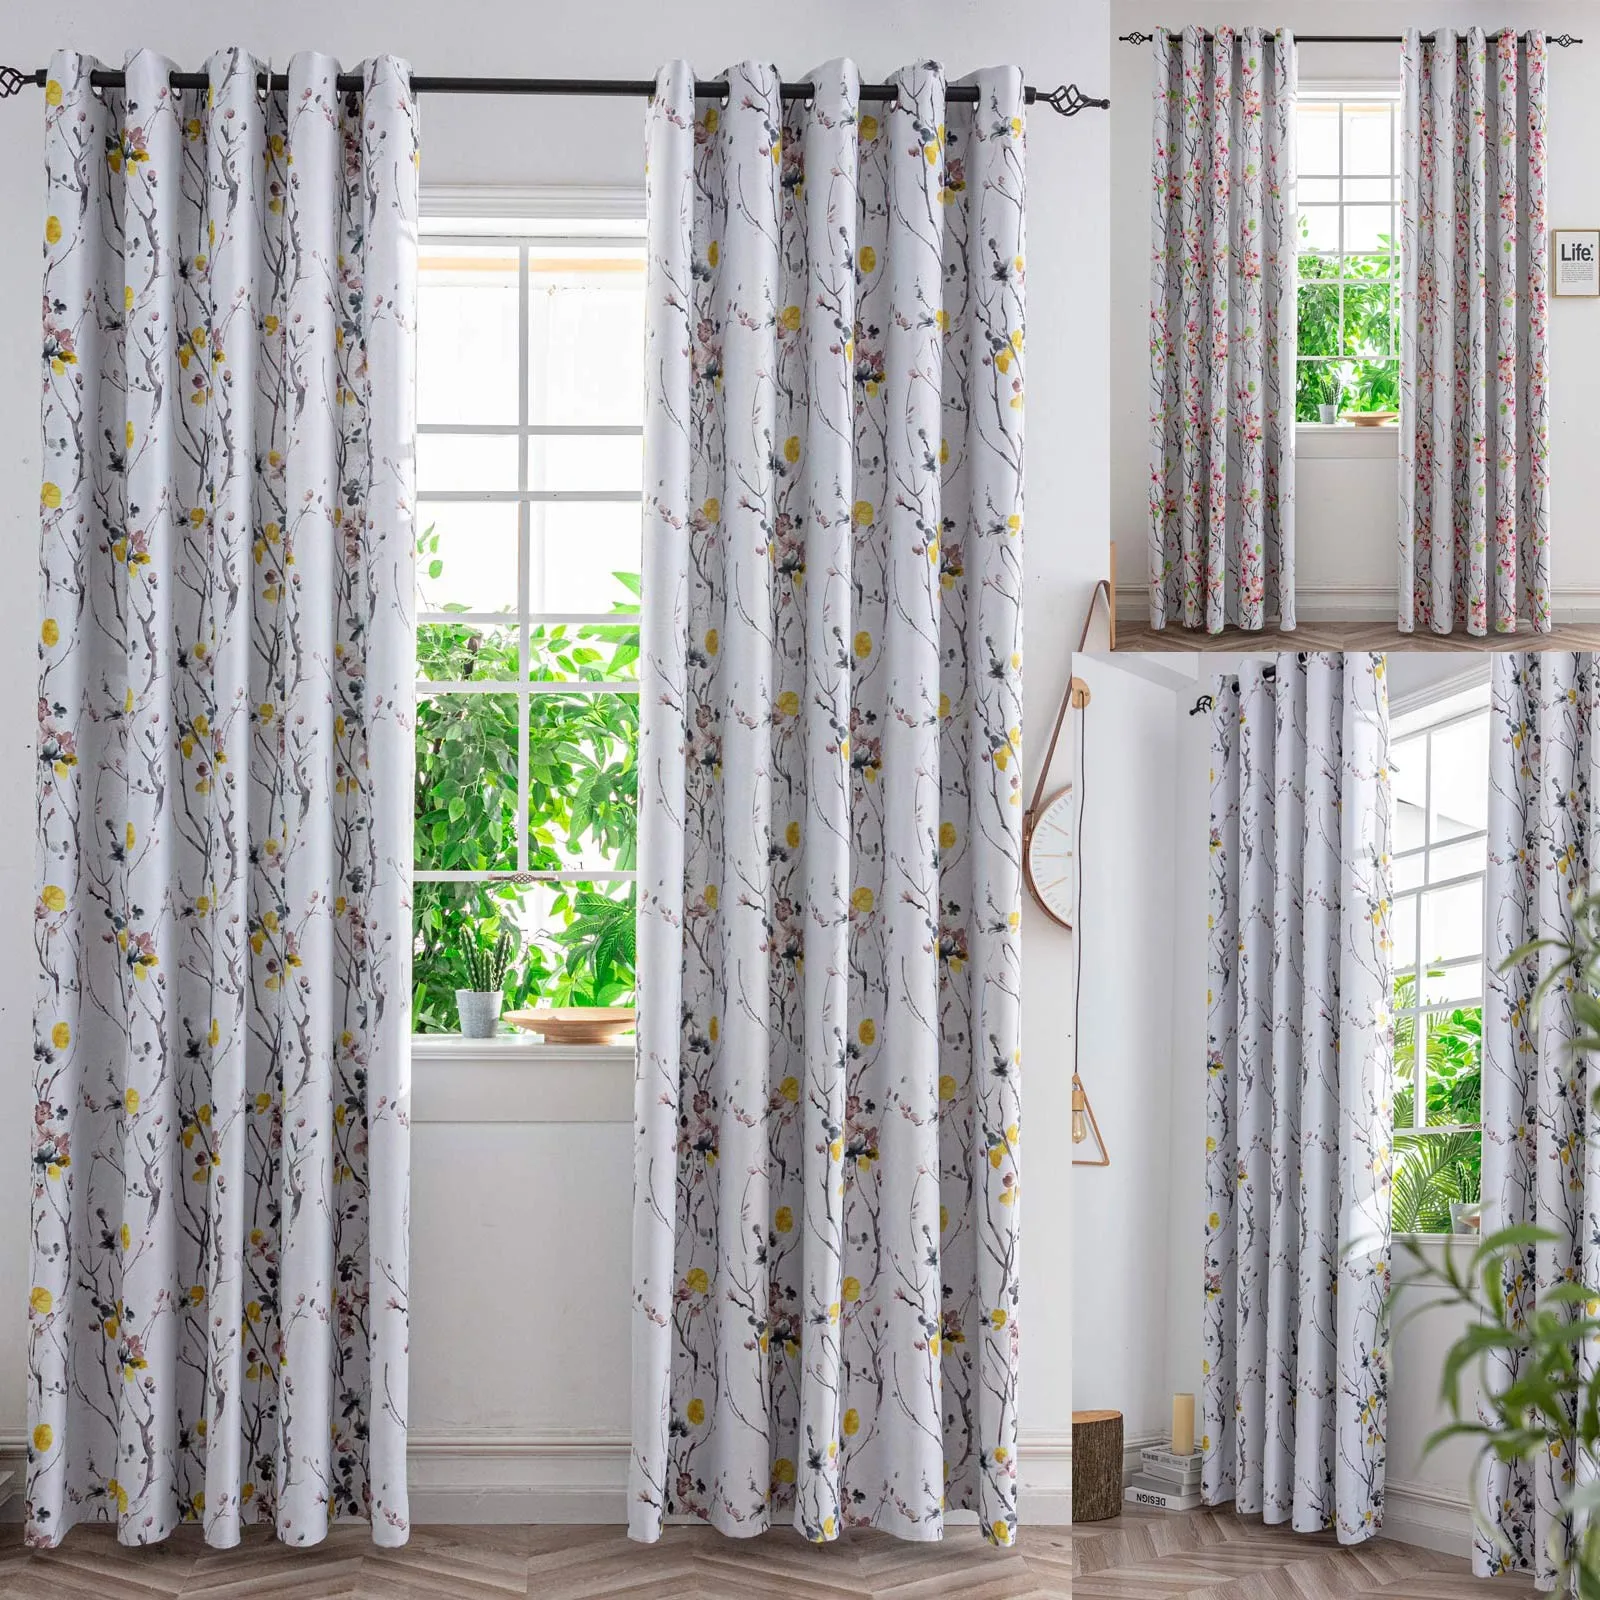 2022 New Embossed White Jacquard Beige Leaf Stereo Curtain Living Room Bedroom Screen Window Scarf Curtain Print